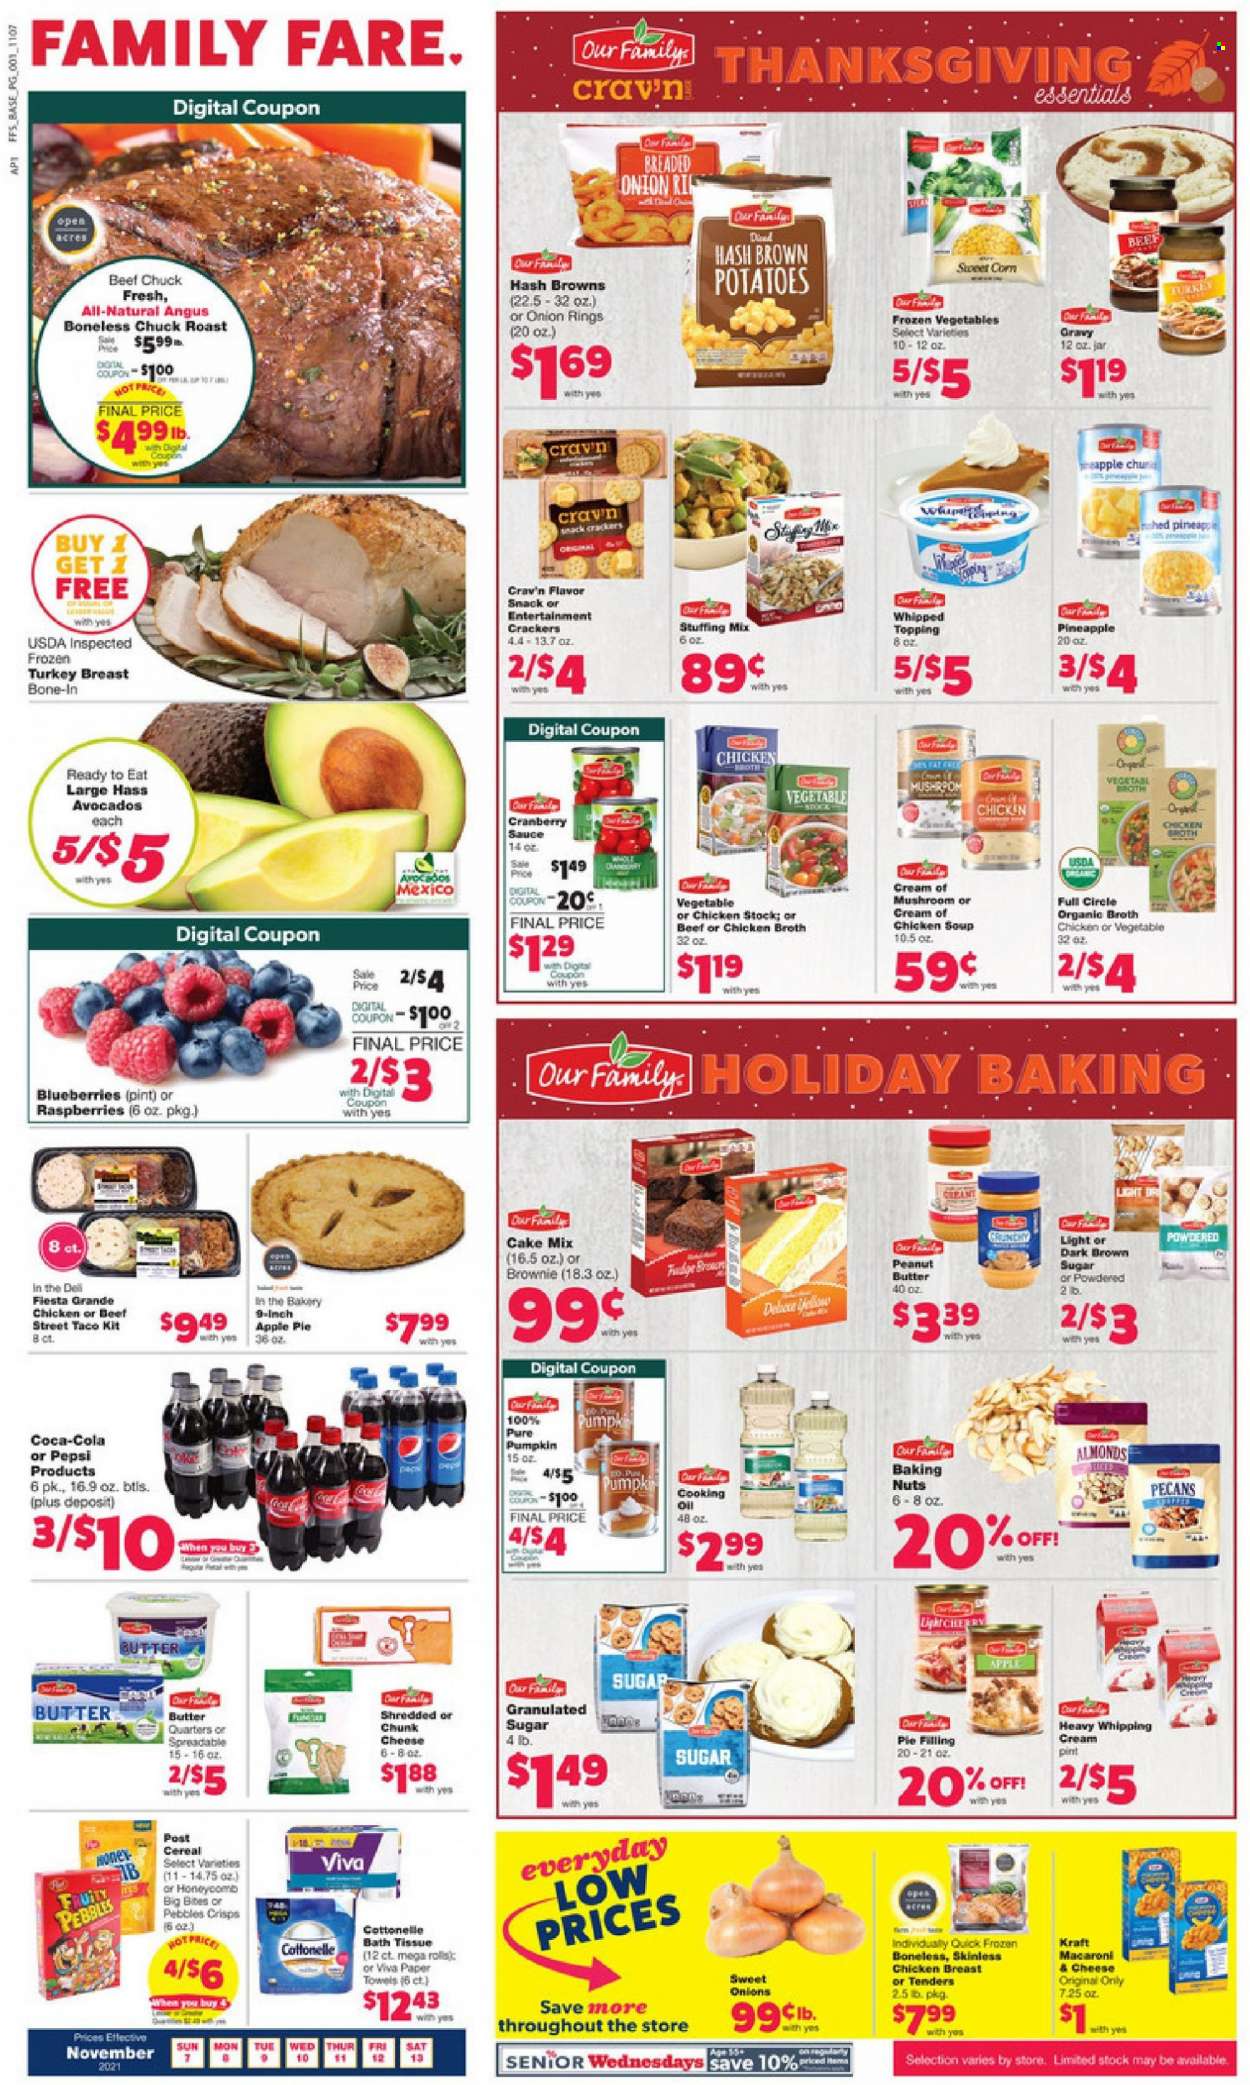 thumbnail - Family Fare Flyer - 11/07/2021 - 11/13/2021 - Sales products - apple pie, brownies, cake mix, potatoes, pumpkin, avocado, blueberries, pineapple, beef hash, macaroni & cheese, onion rings, chicken soup, soup, sauce, Kraft®, chunk cheese, whipping cream, frozen vegetables, hash browns, snack, crackers, cane sugar, stuffing mix, pie filling, chicken broth, topping, broth, cereals, Fruity Pebbles, oil, cranberry sauce, peanut butter, almonds, pecans, Coca-Cola, Pepsi, turkey breast, whole turkey, beef meat, chuck roast, bath tissue, Cottonelle, kitchen towels, paper towels, pen. Page 1.